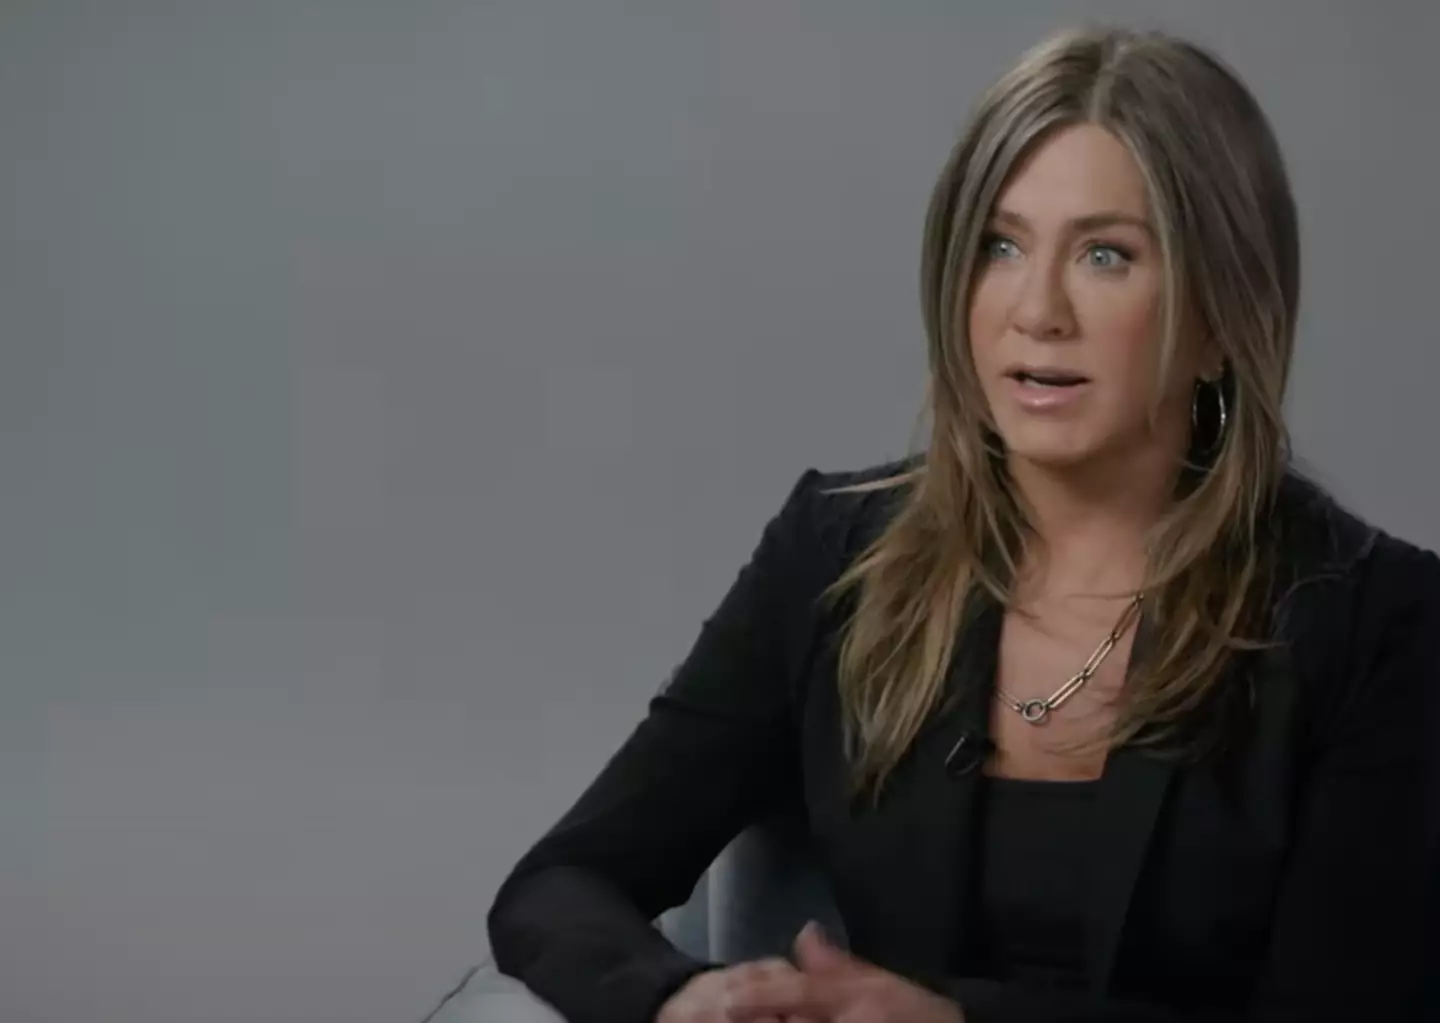 Aniston explained how she thinks the rise of the internet and platforms like TikTok, Instagram and YouTube are almost 'diluting' actors' jobs.